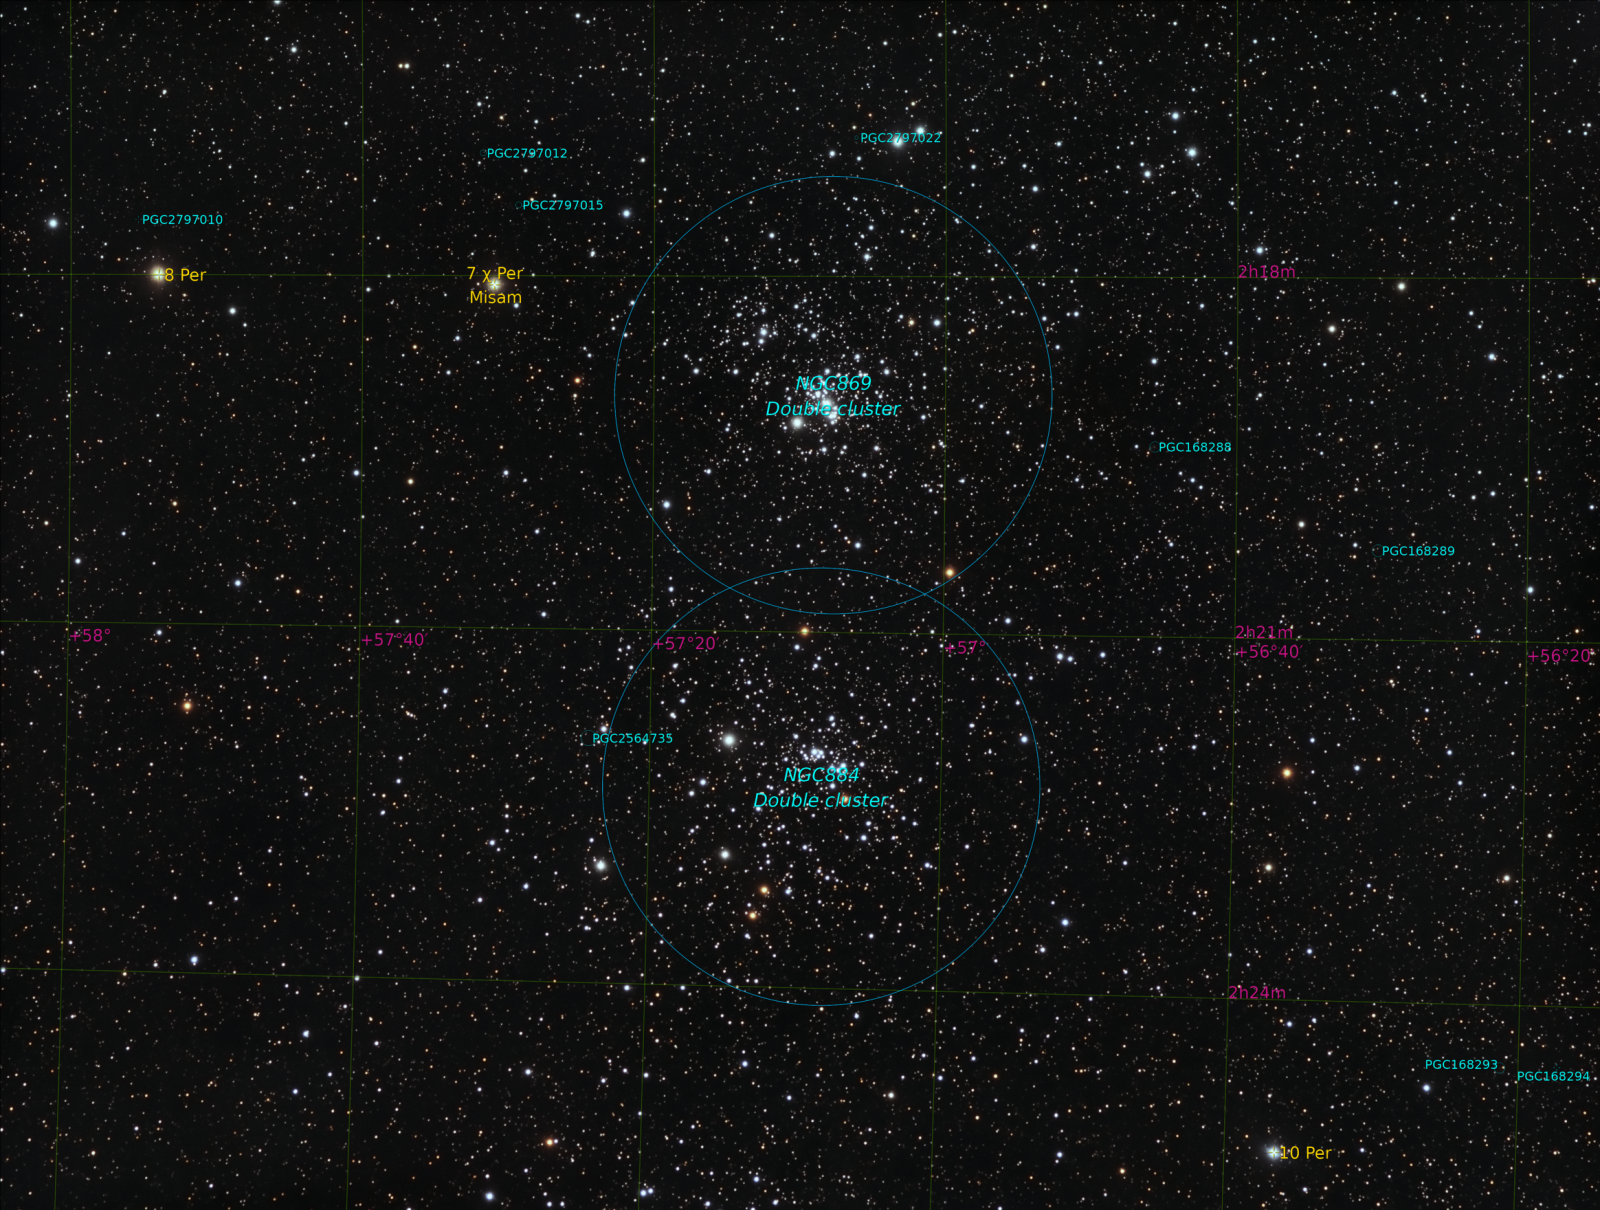 NGC_884_annotated_small.thumb.png.7f888e483f4157462b0b1bfdf29c5e96.png